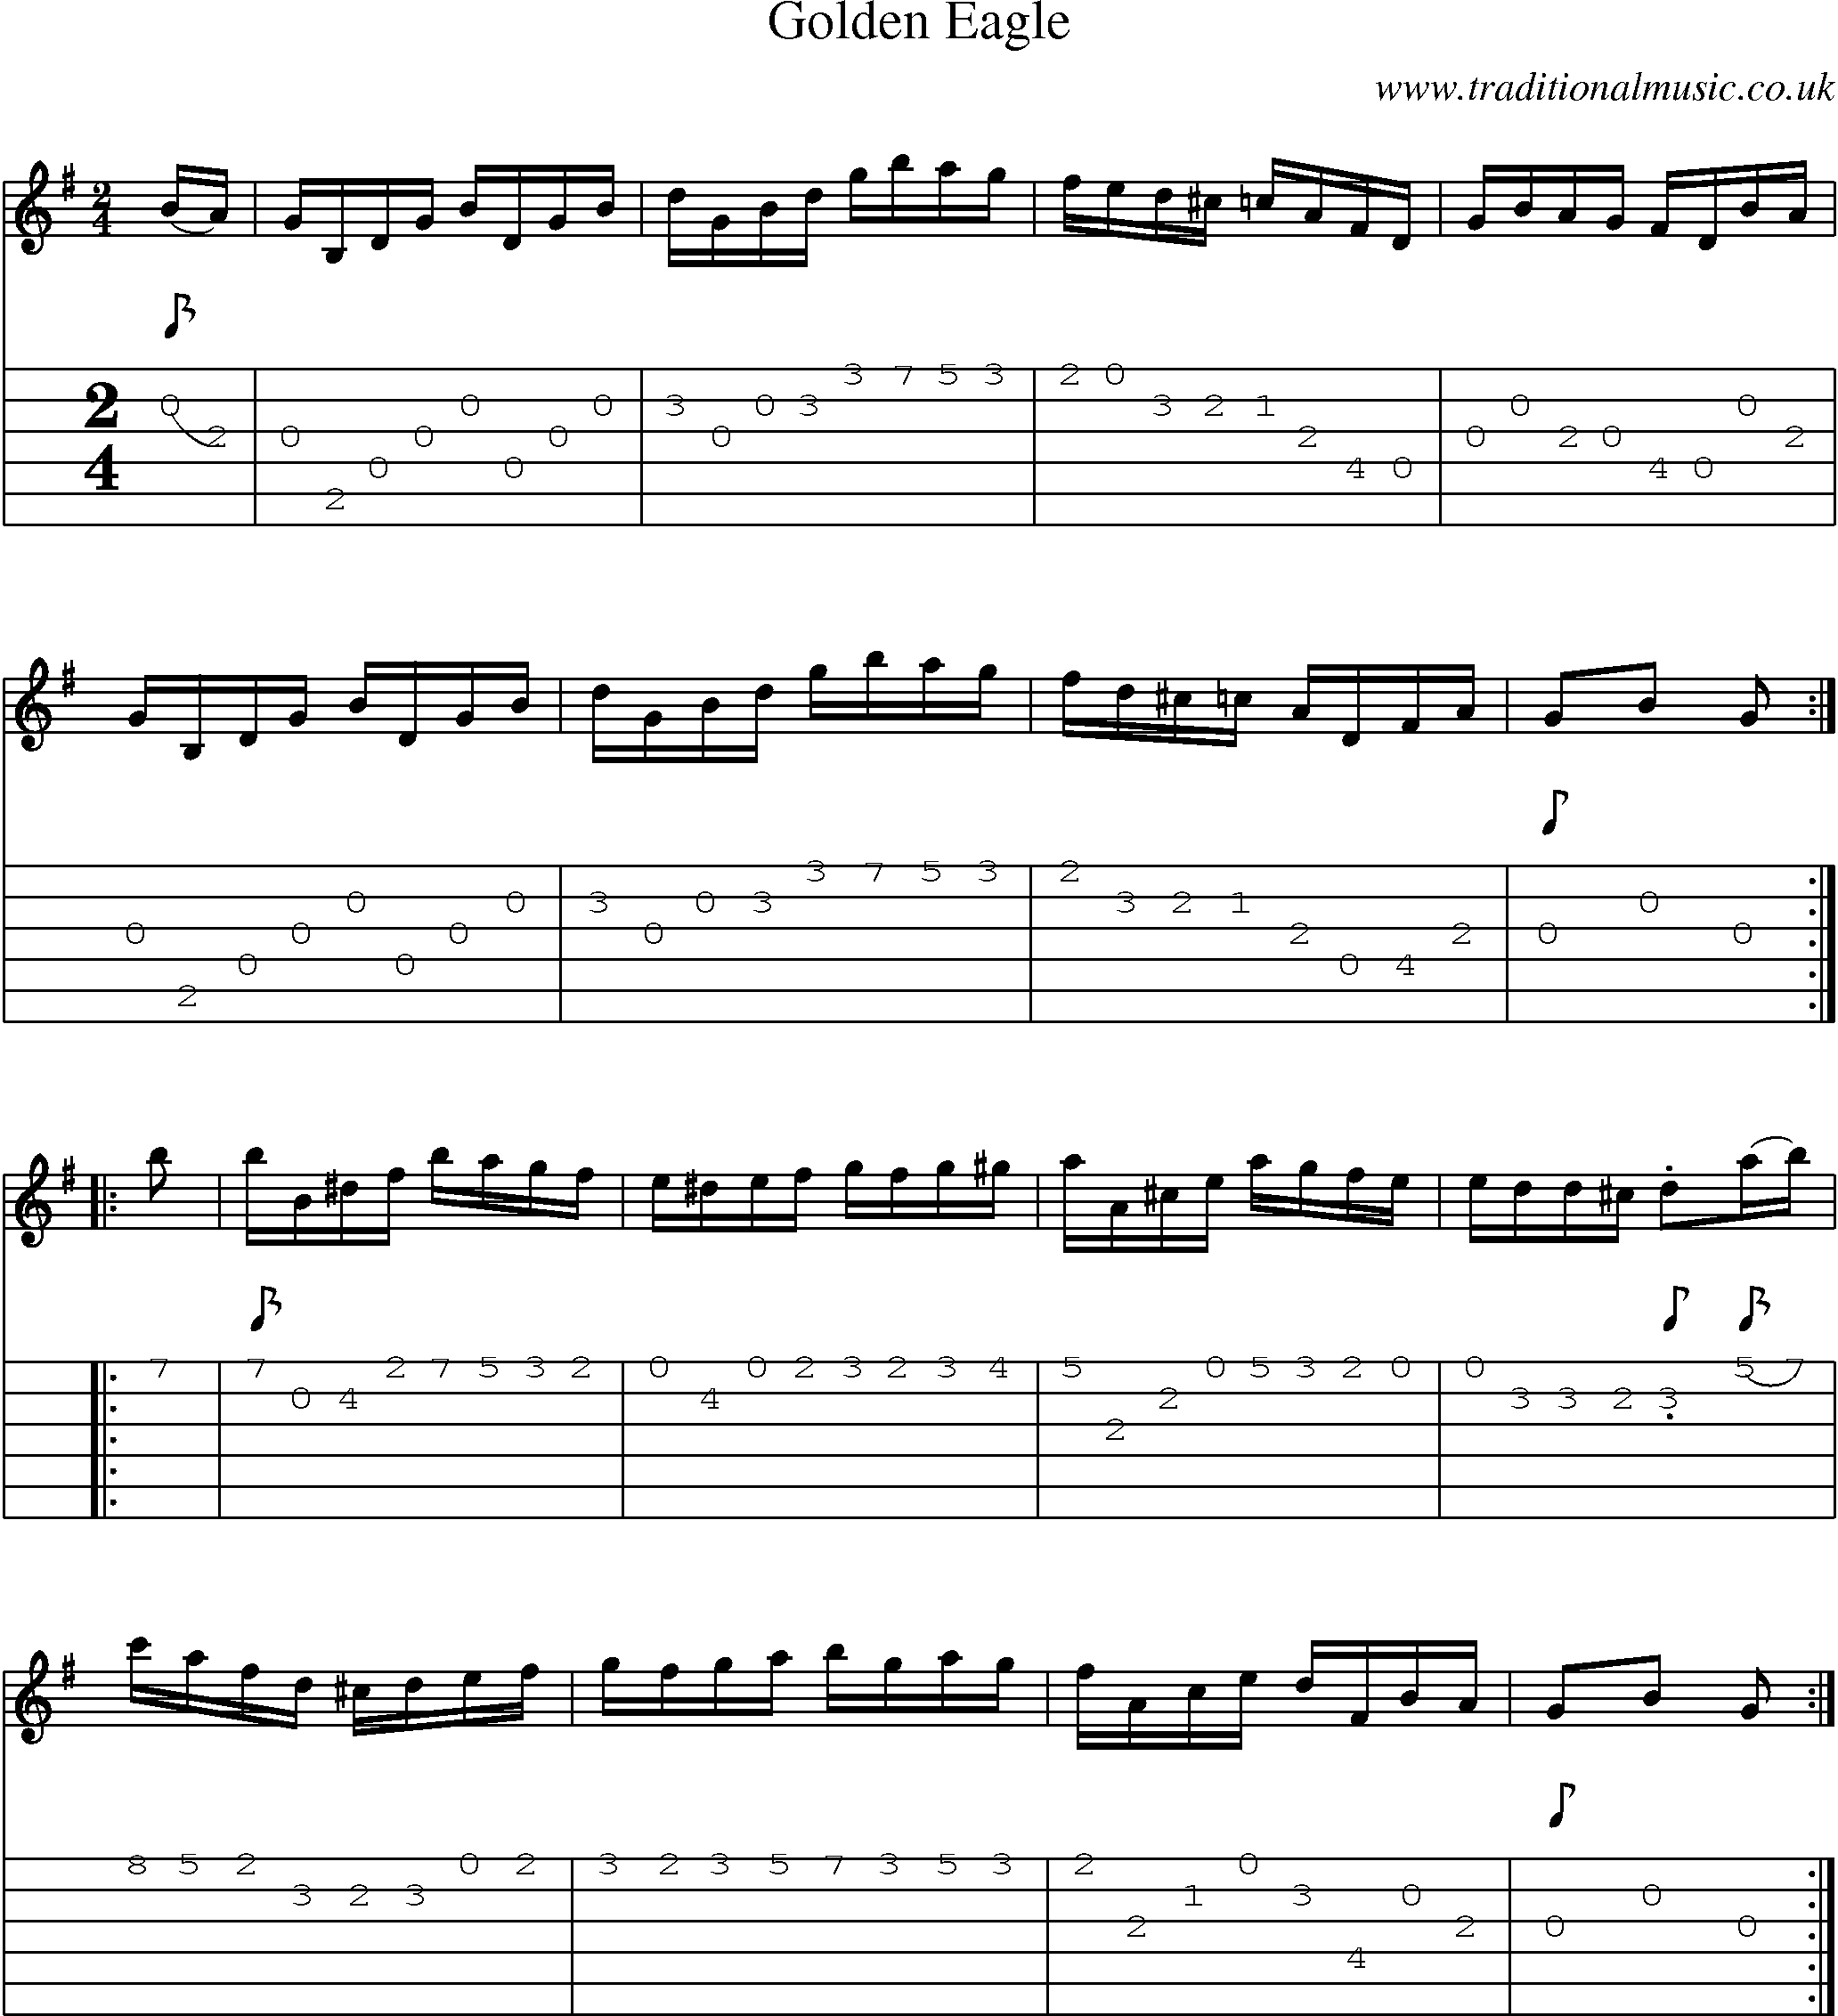 Music Score and Guitar Tabs for Golden Eagle